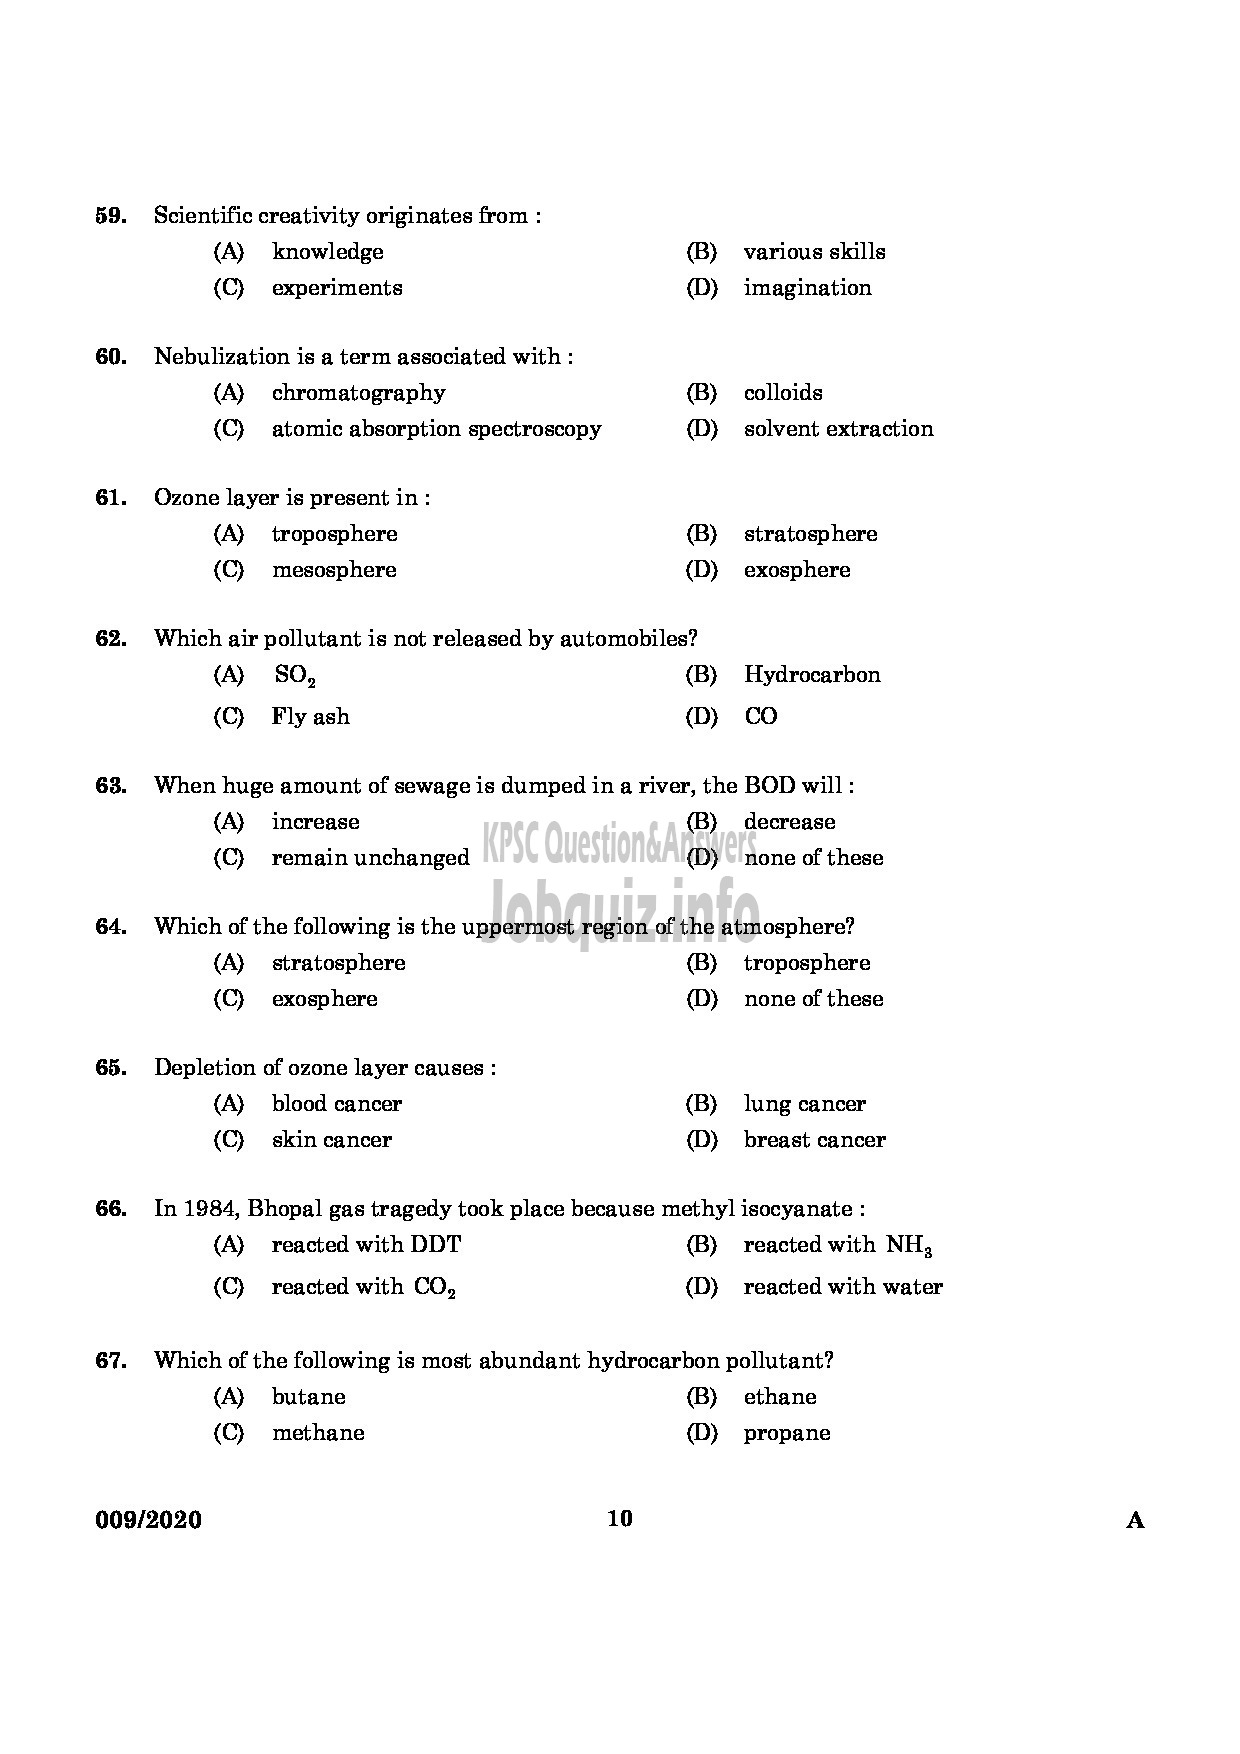 Kerala PSC Question Paper - CHEMIST IN FACTORIES AND BOILERS ENGLISH -8